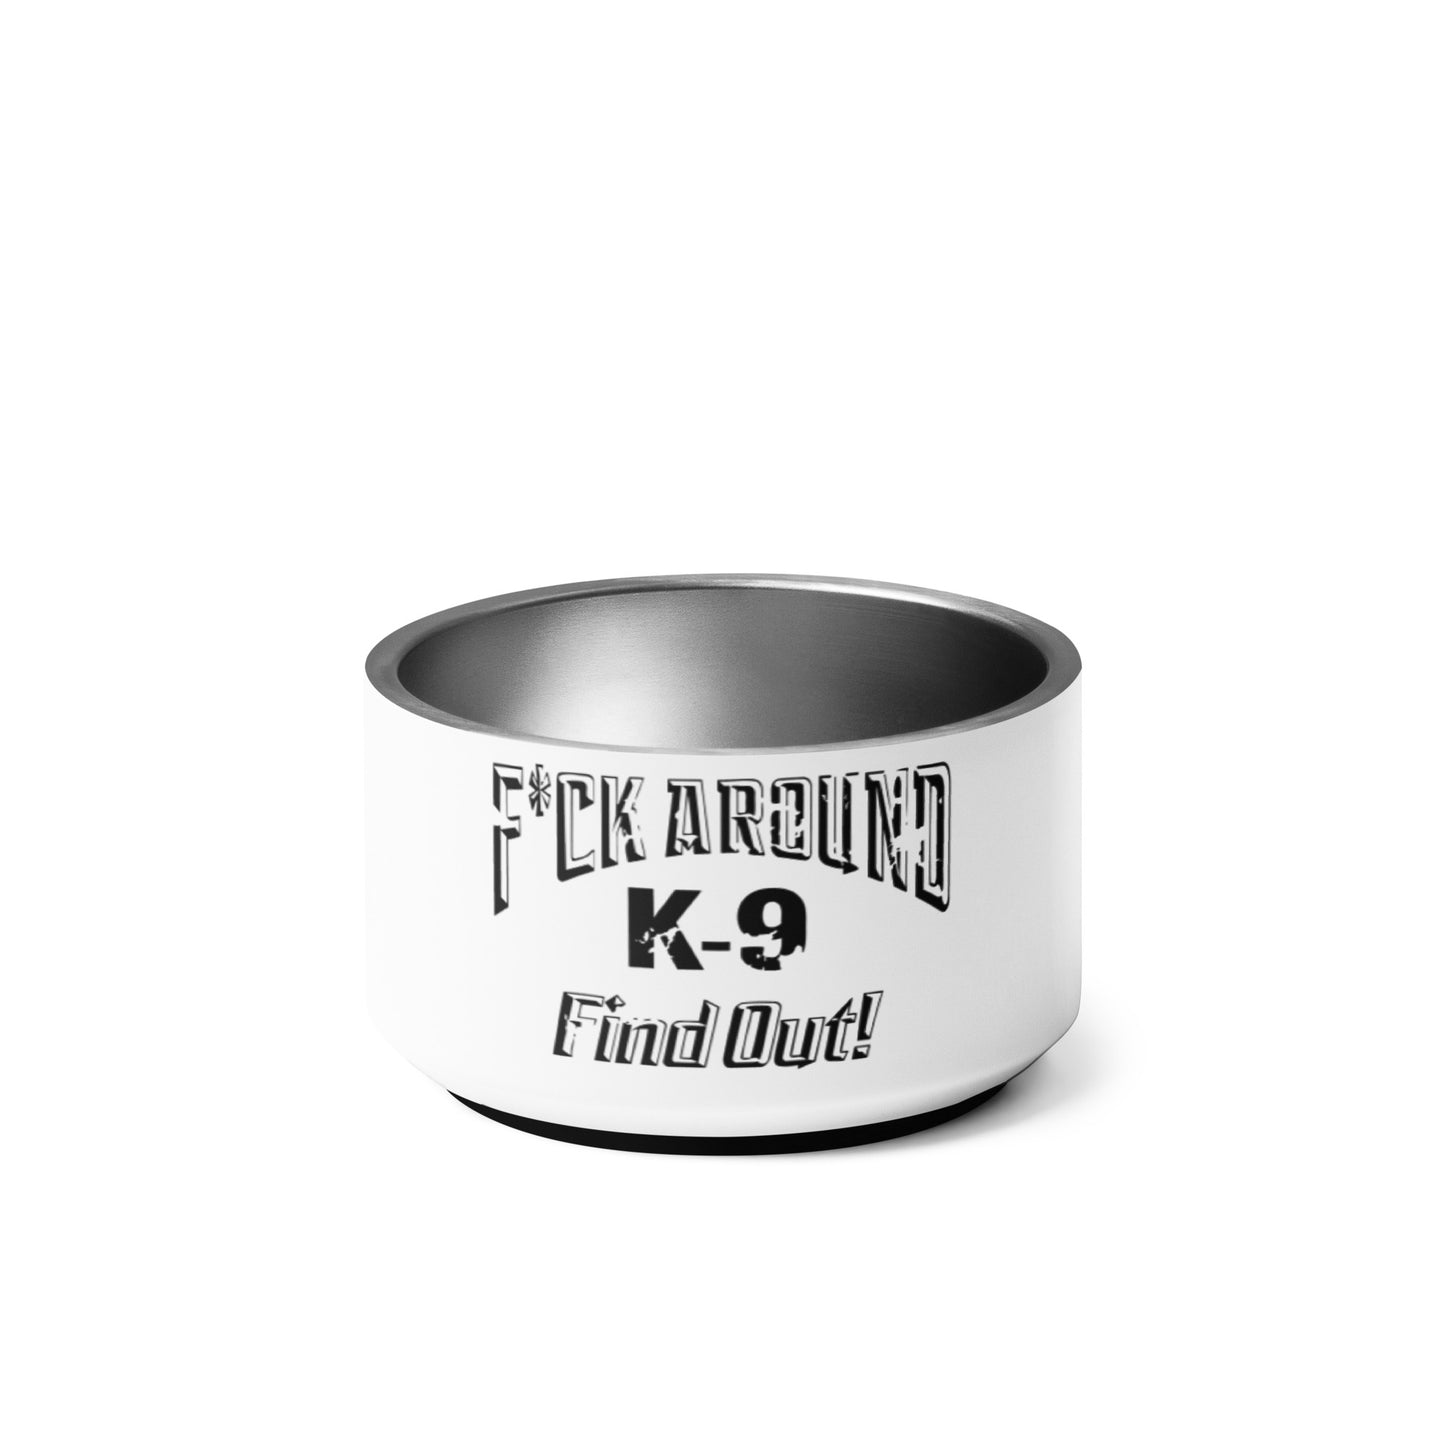 F*CK AROUND K-9 Find Out!™ Pet bowl